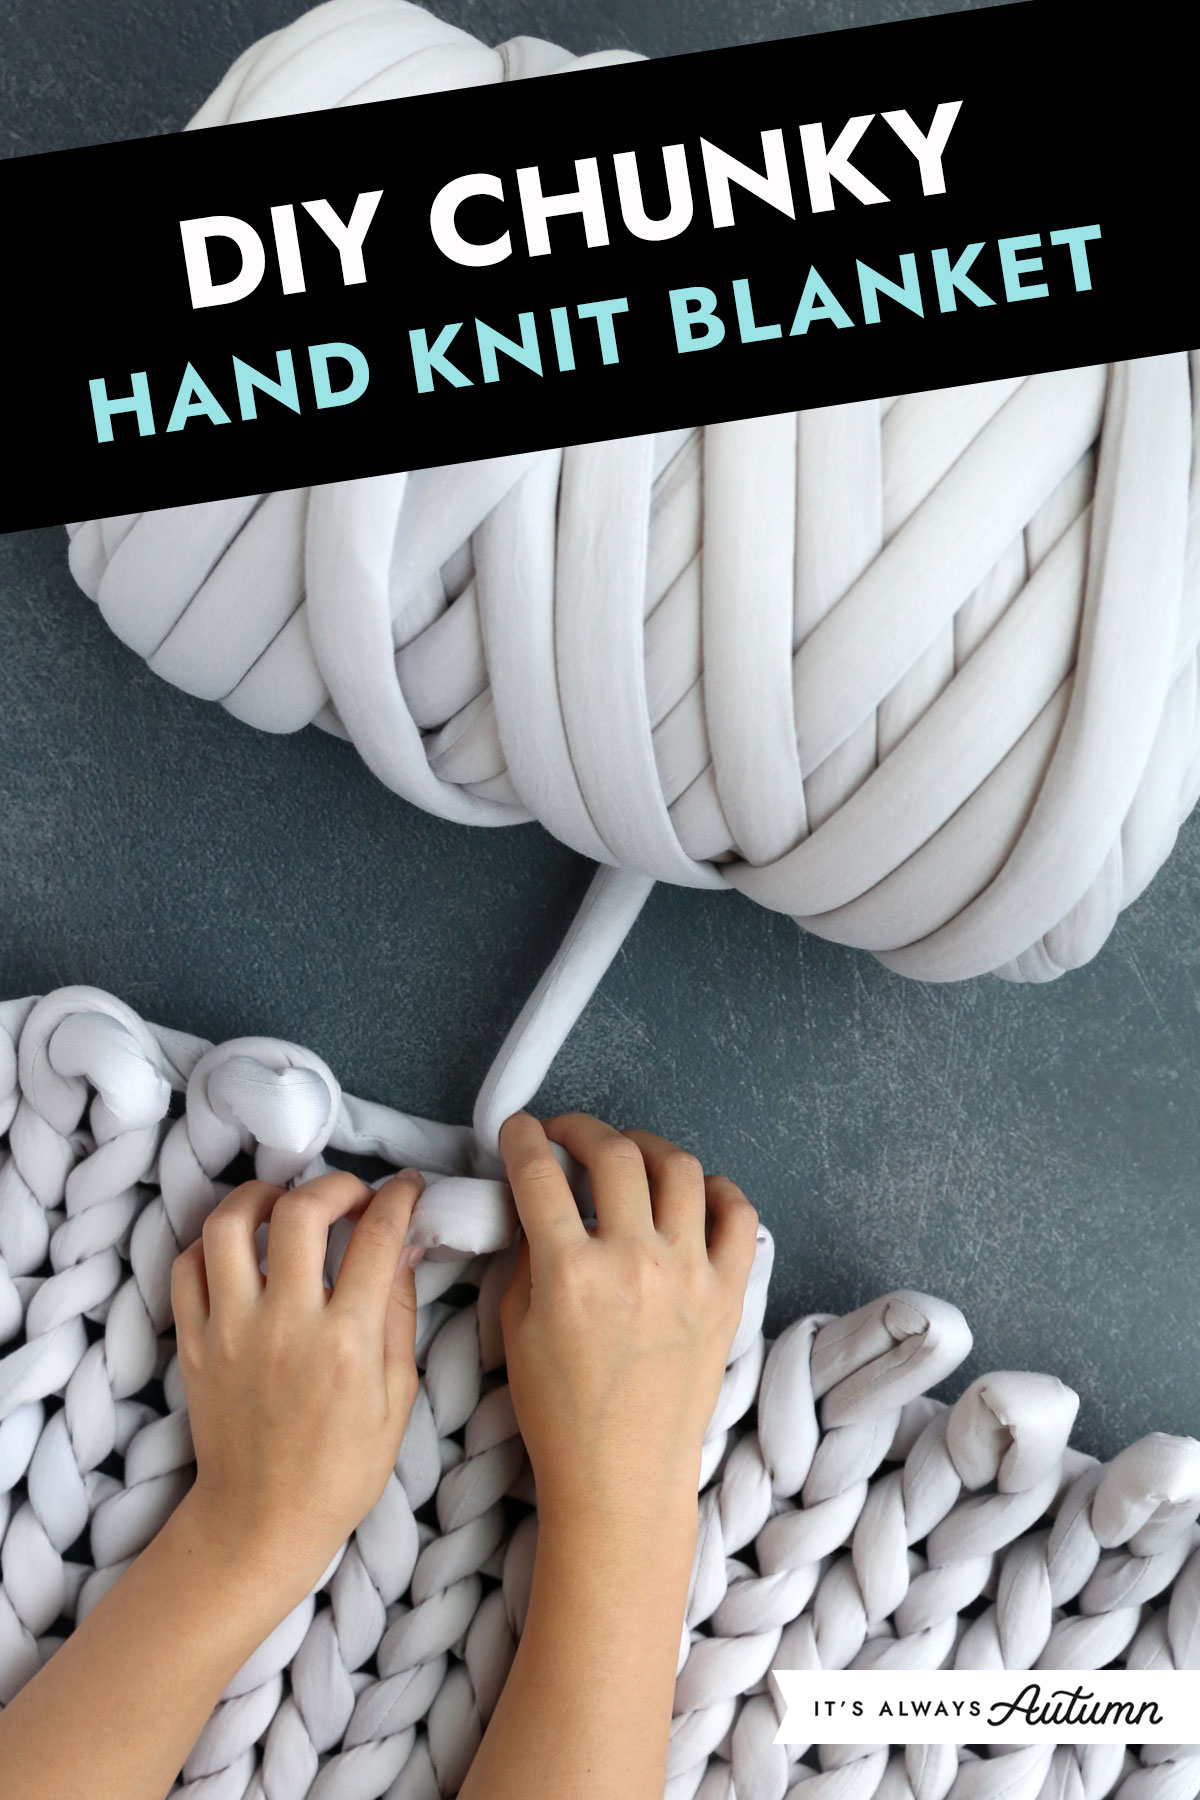 Five Cable Knits - How Did You Make This?